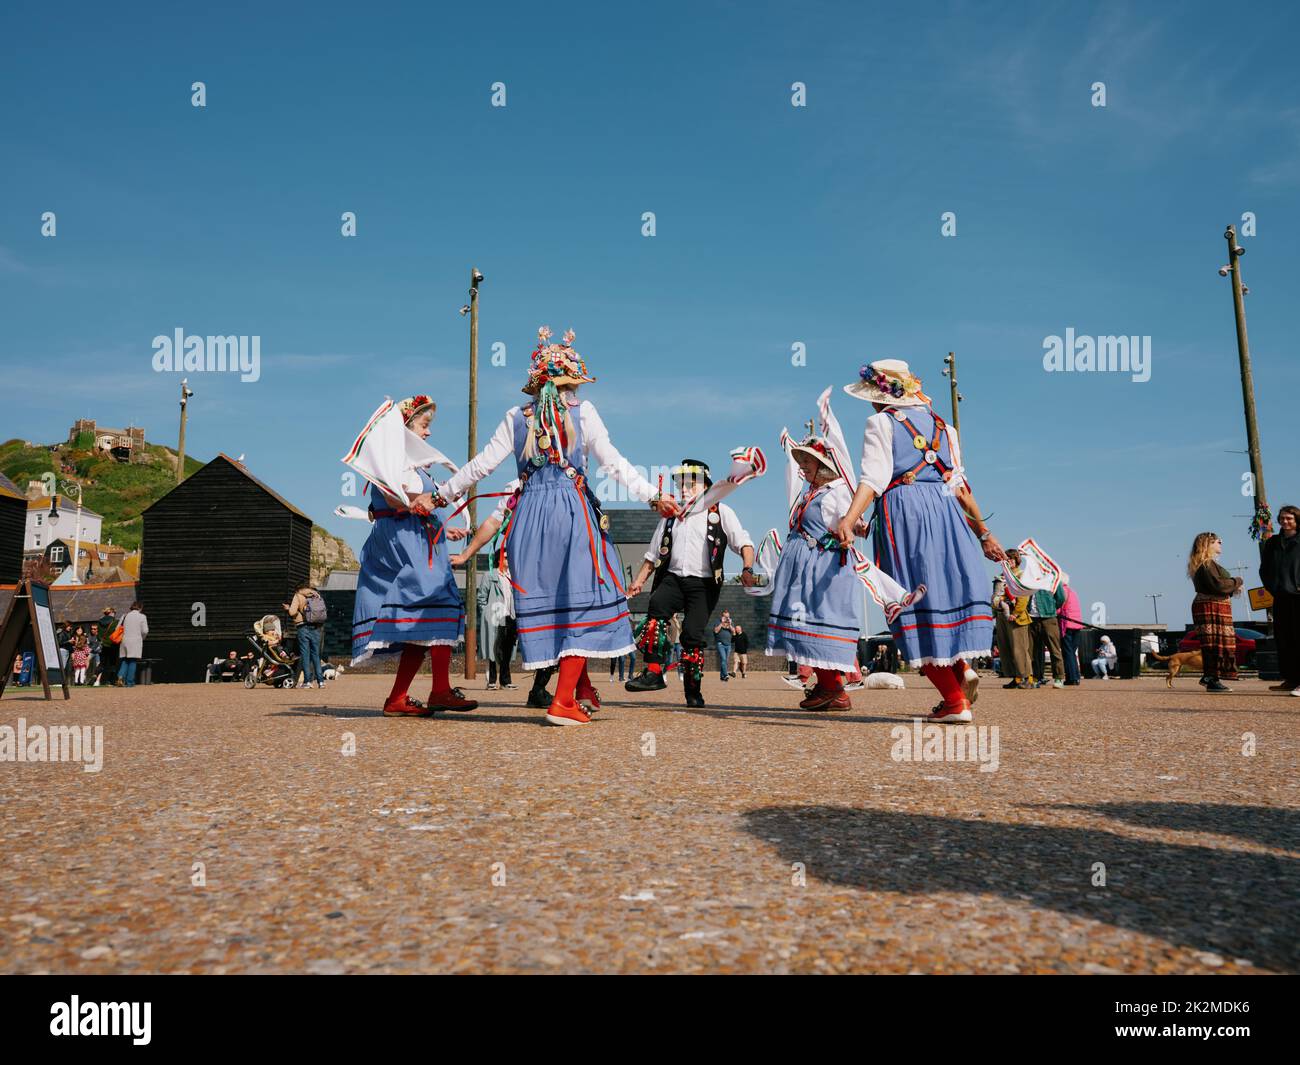 Morris dancers dancing in The Stade open space at the Jack in the Green festival May 2022 - Hastings East Sussex England UK Stock Photo